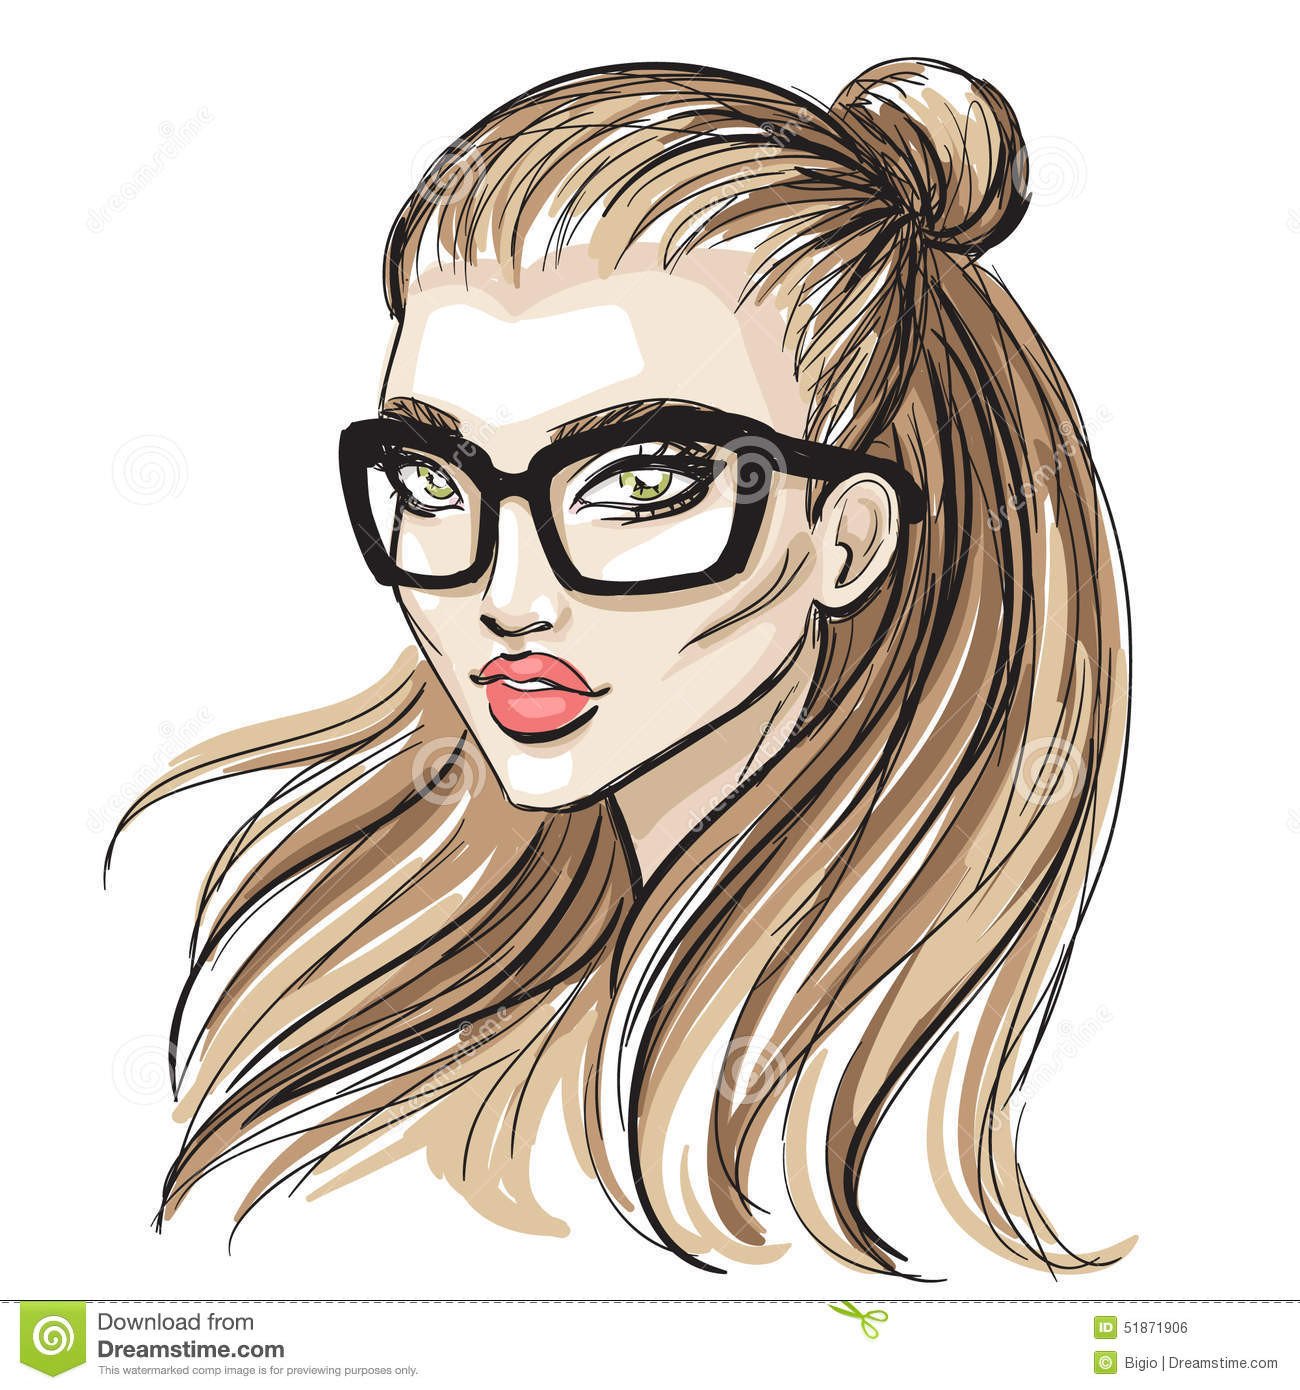 Drawn girl hipster Pencil and in color drawn girl hipster